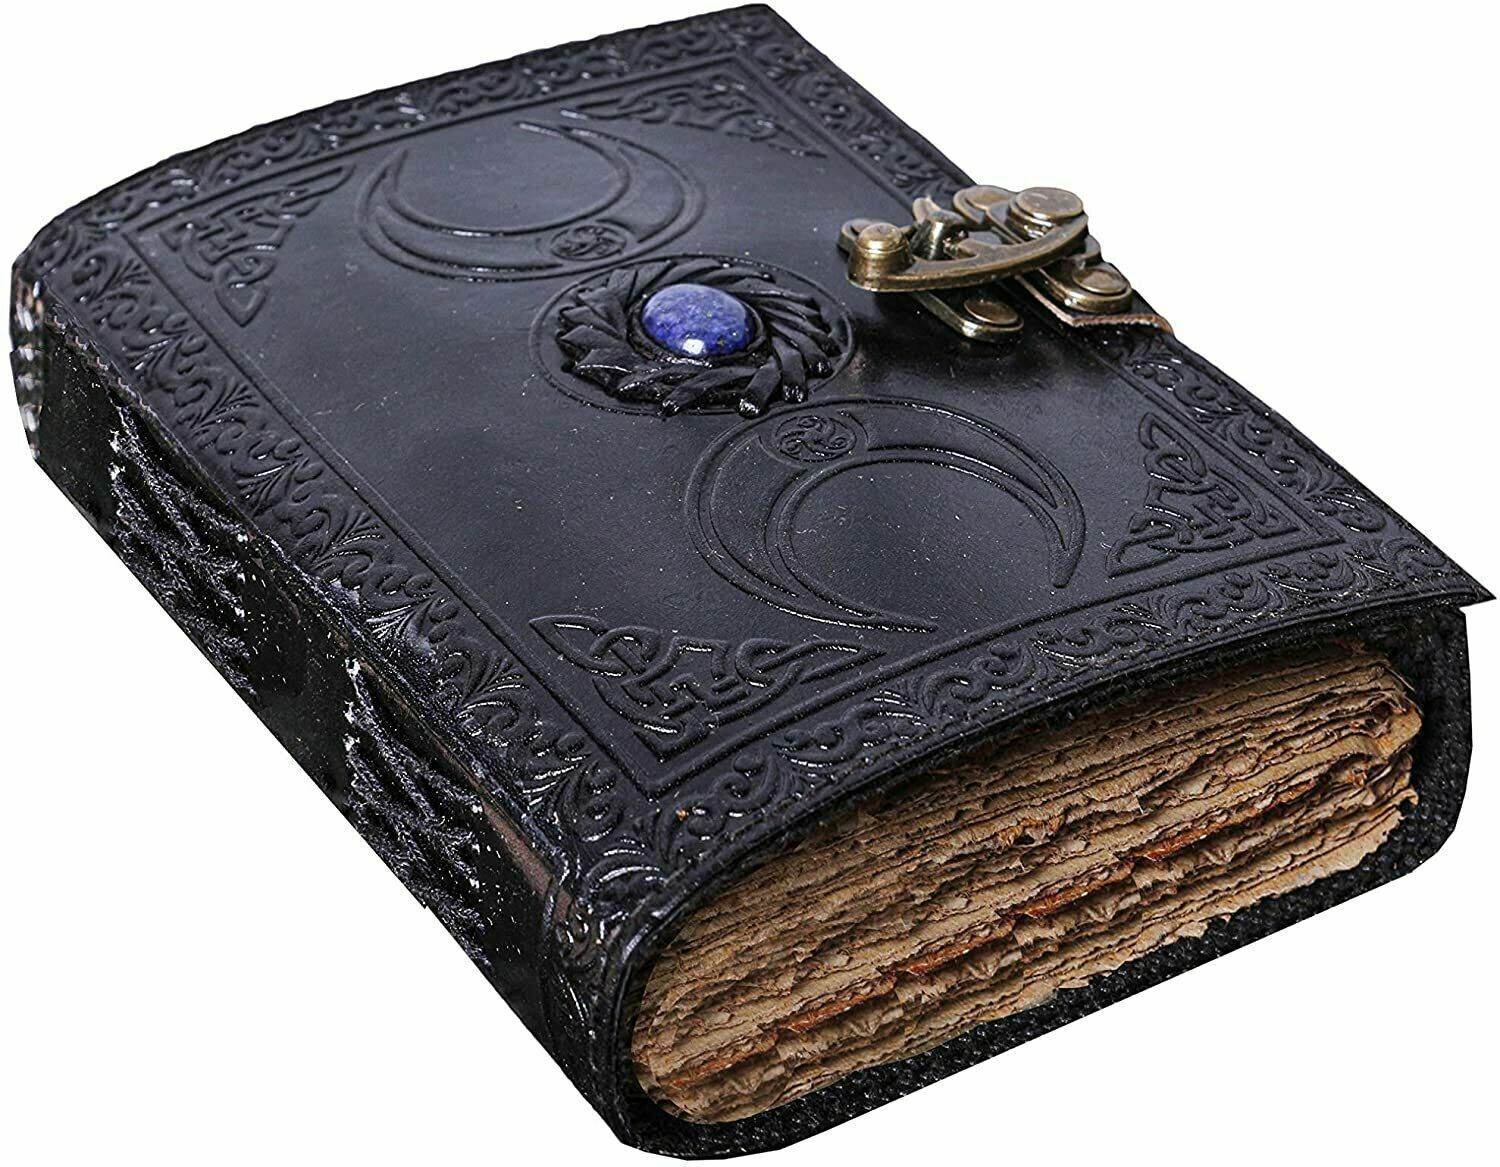 Vintage Journal Semi Precious Leather Rustic Diary With Stone Black Triple Moon